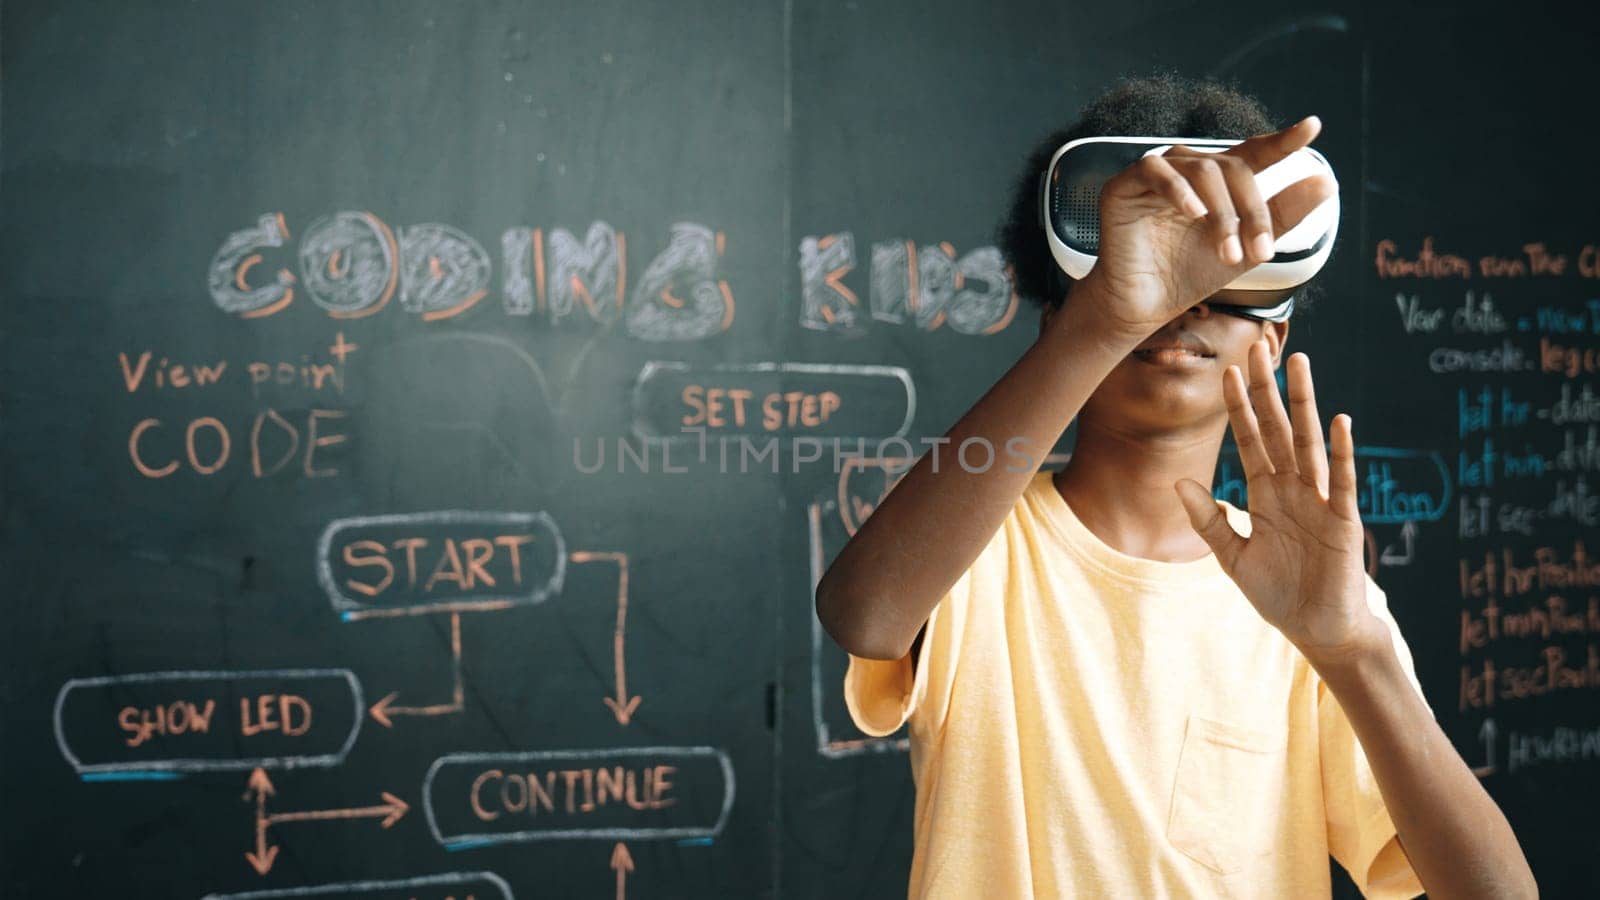 African student use VR headset learning innovation at metaverse while standing at blackboard with coding or programing prompt written at STEM technology classroom. Creative innovation. Edification.